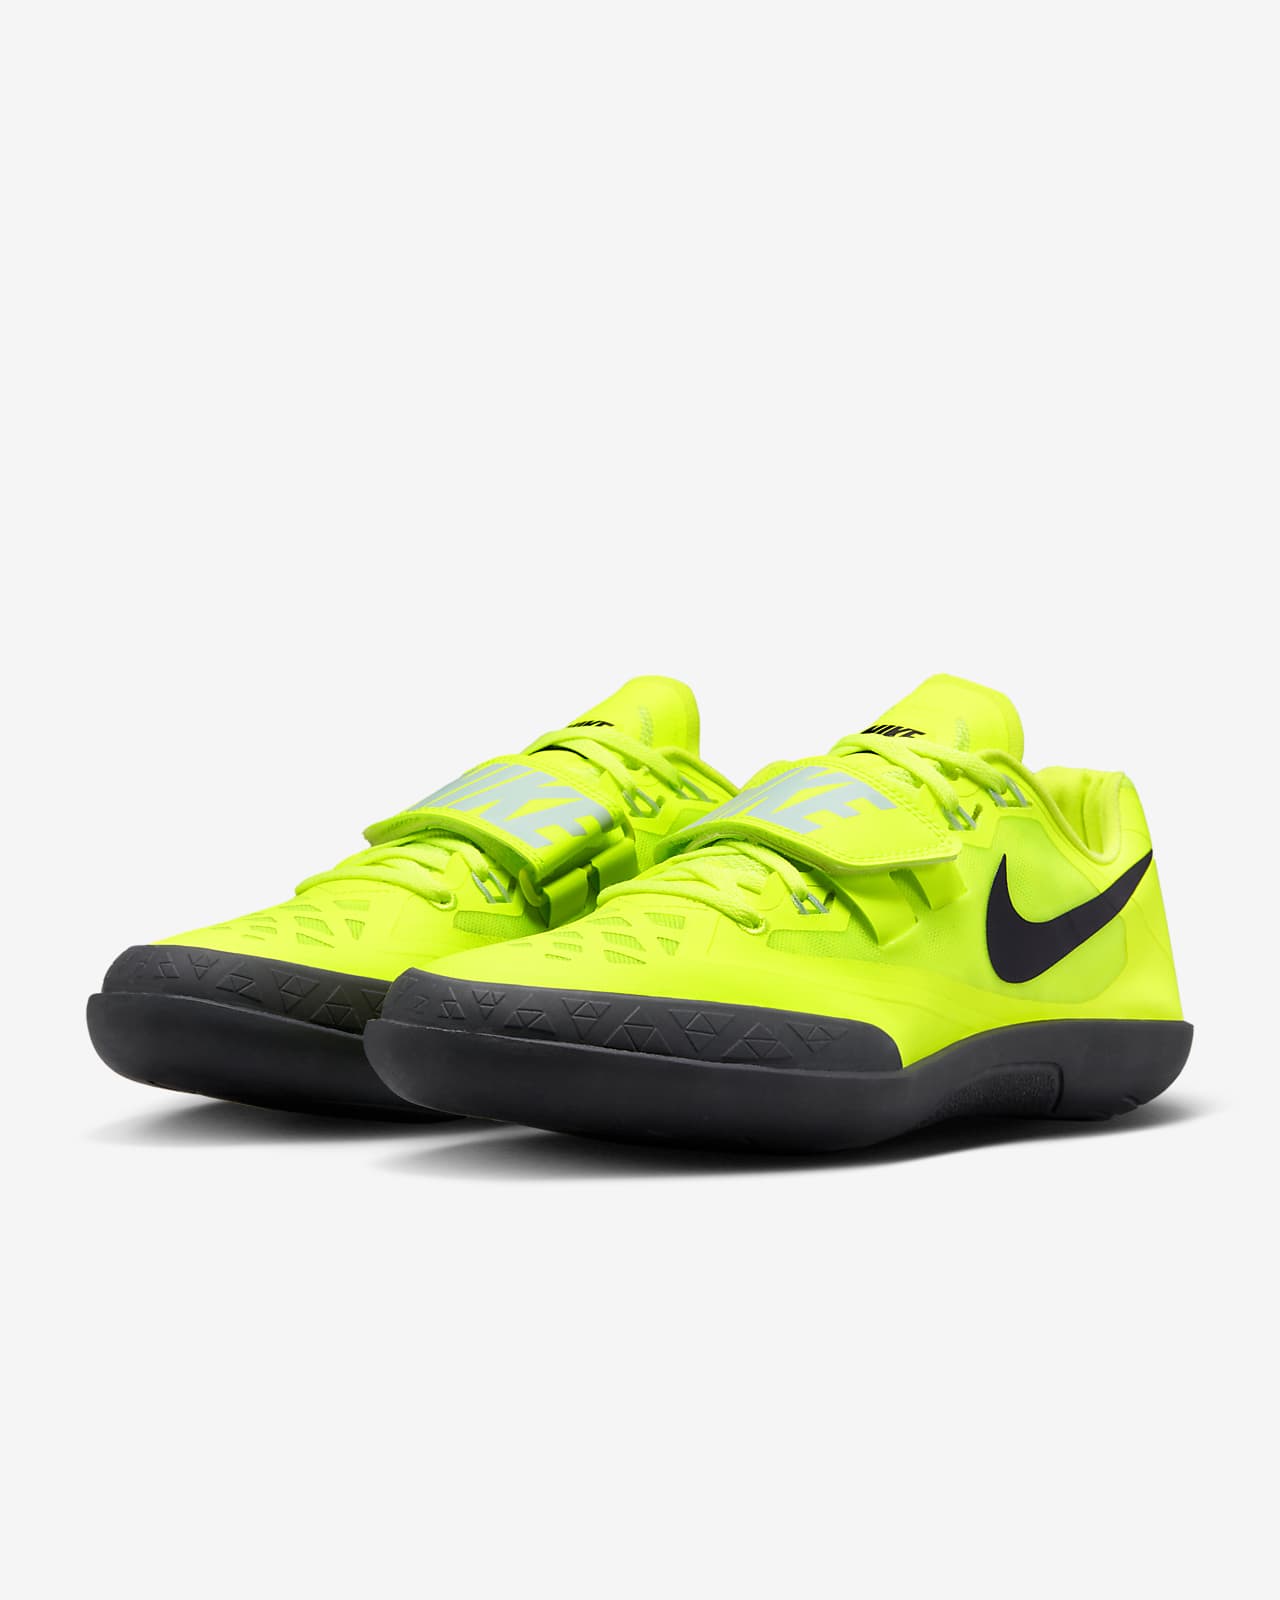 Nike SD 4 Track & Field Throwing Shoes.